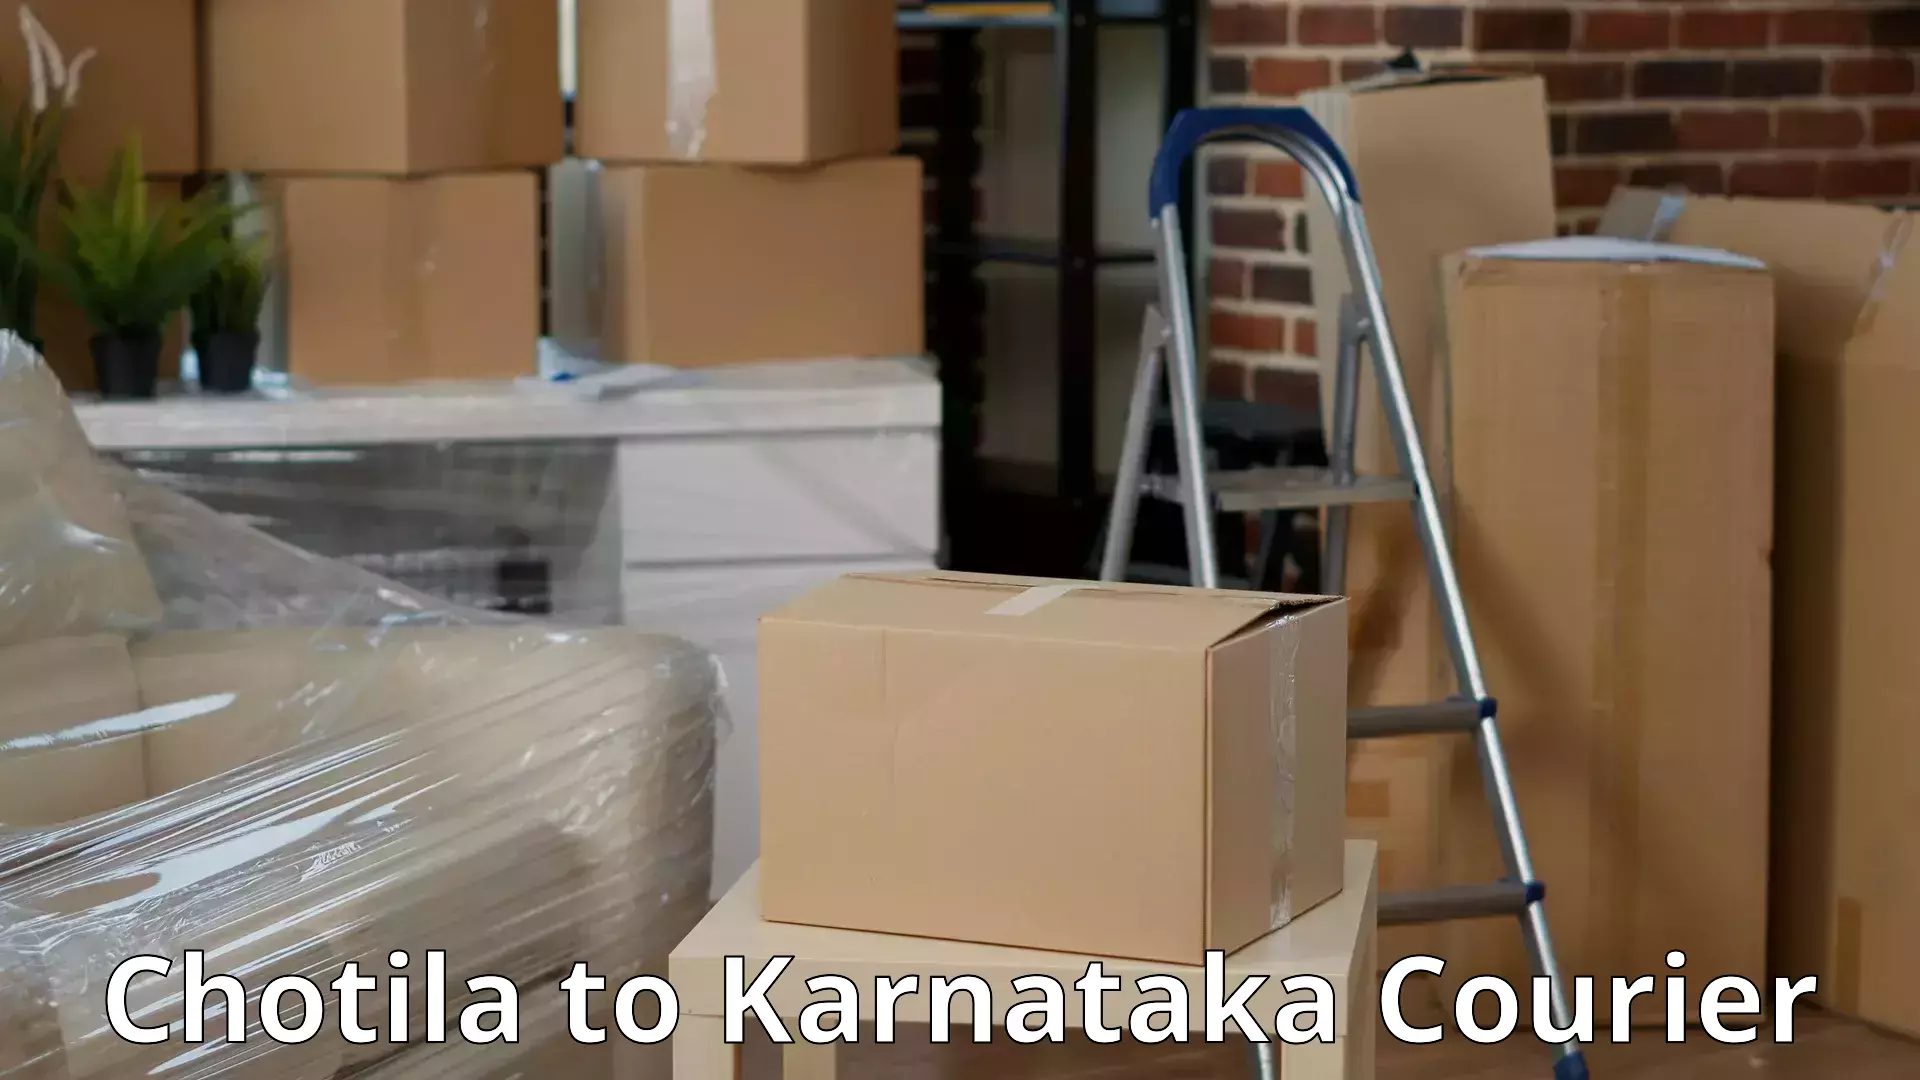 Furniture delivery service in Chotila to Dharwad